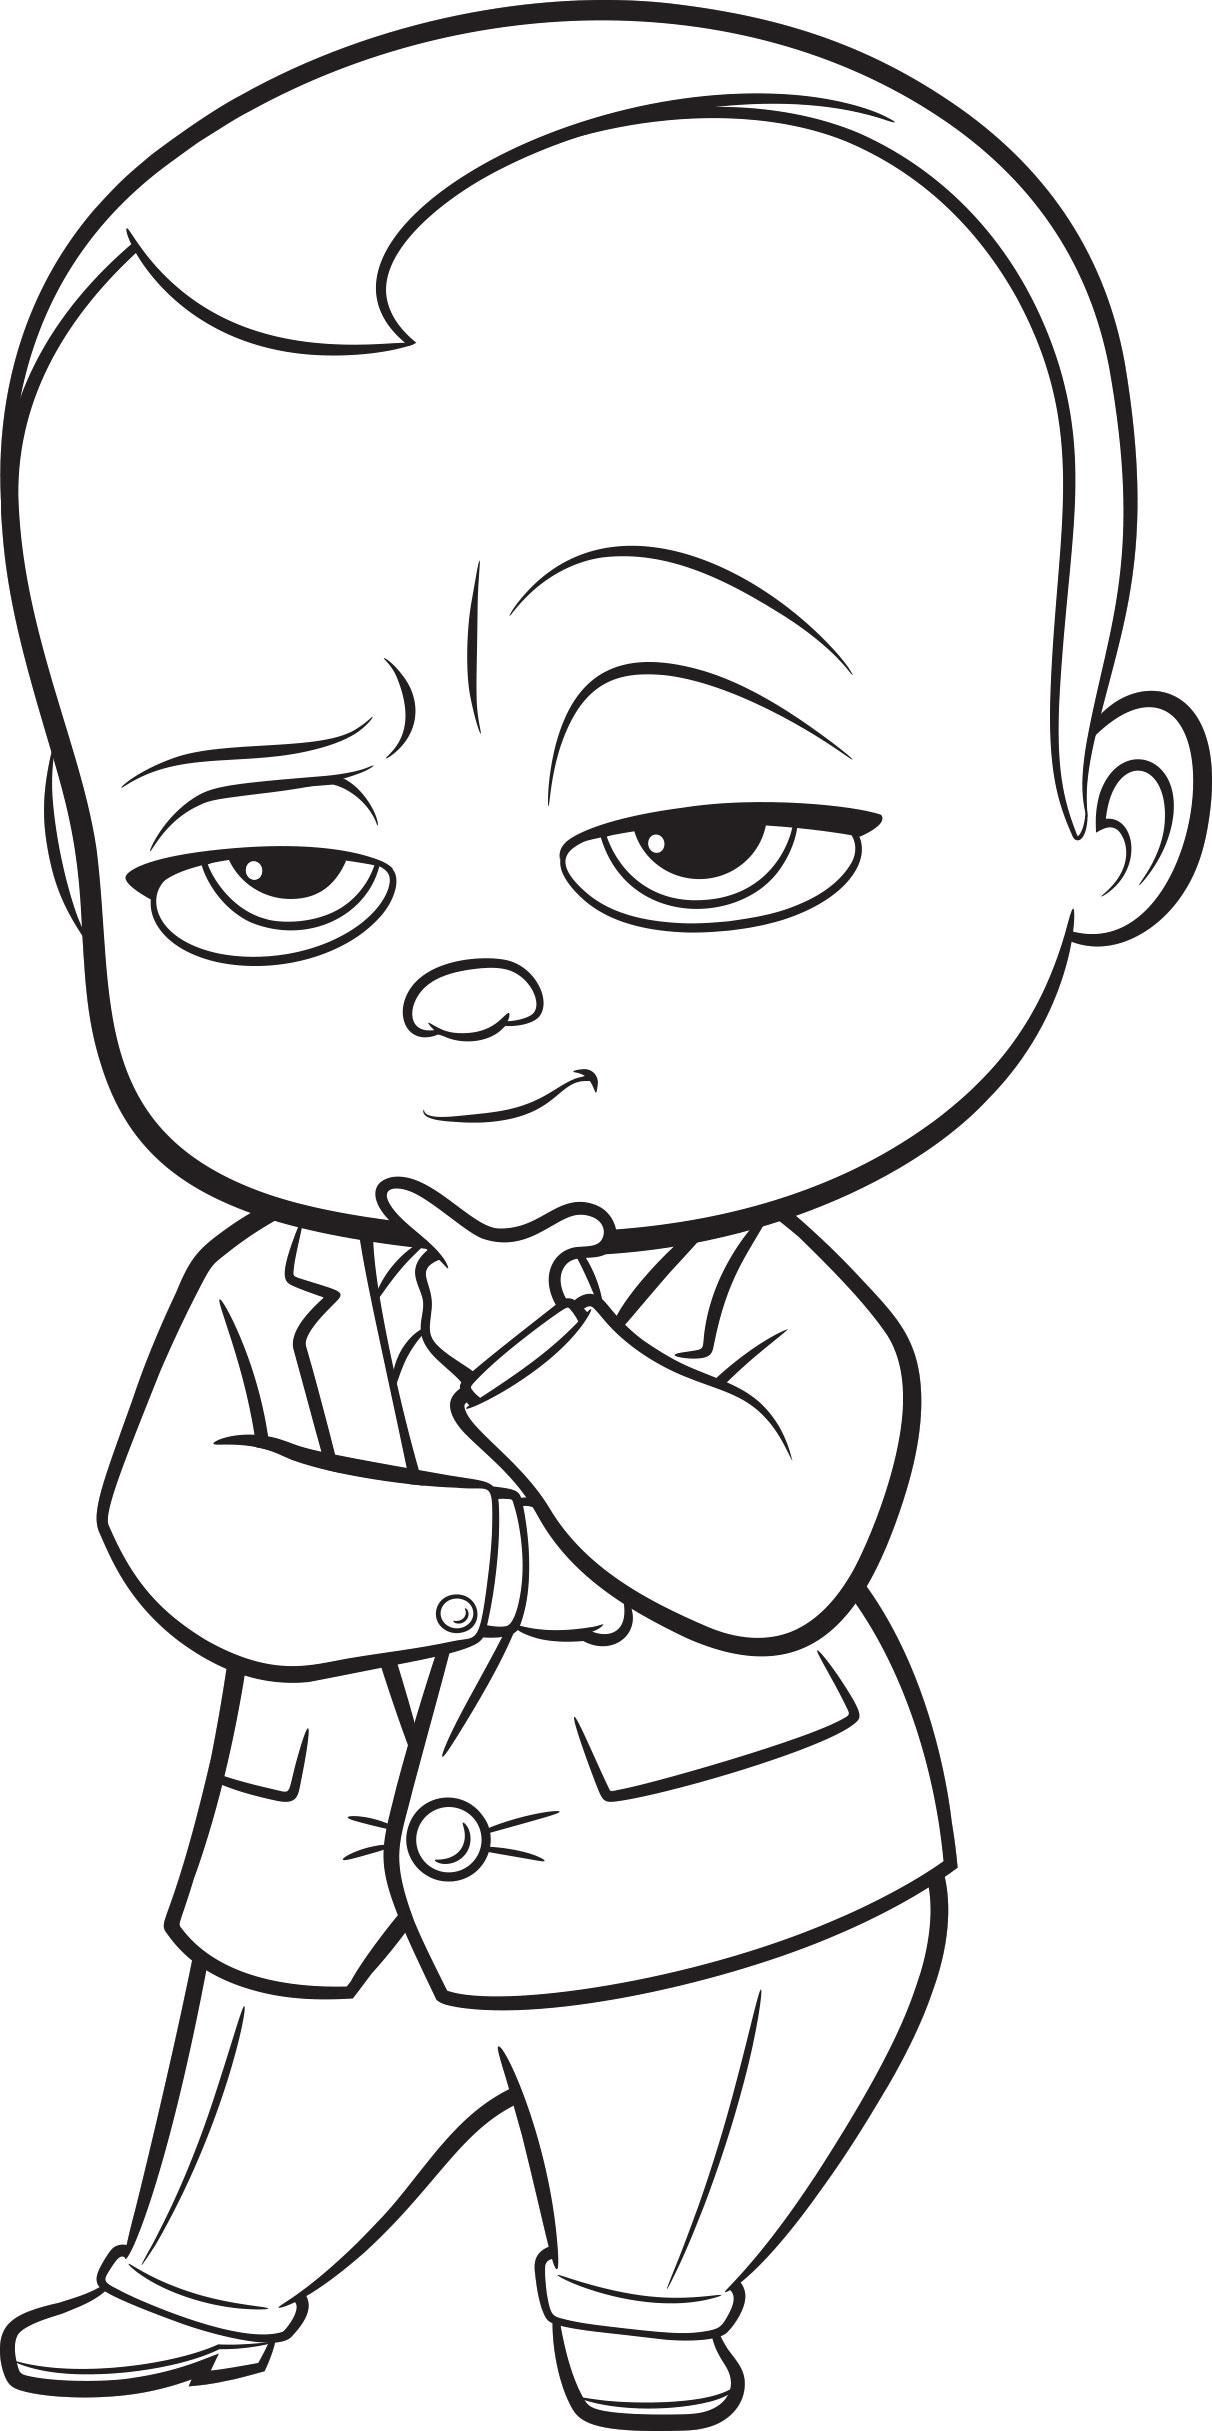 Baby Coloring Pages For Kids
 Boss Baby Coloring Pages Best Coloring Pages For Kids